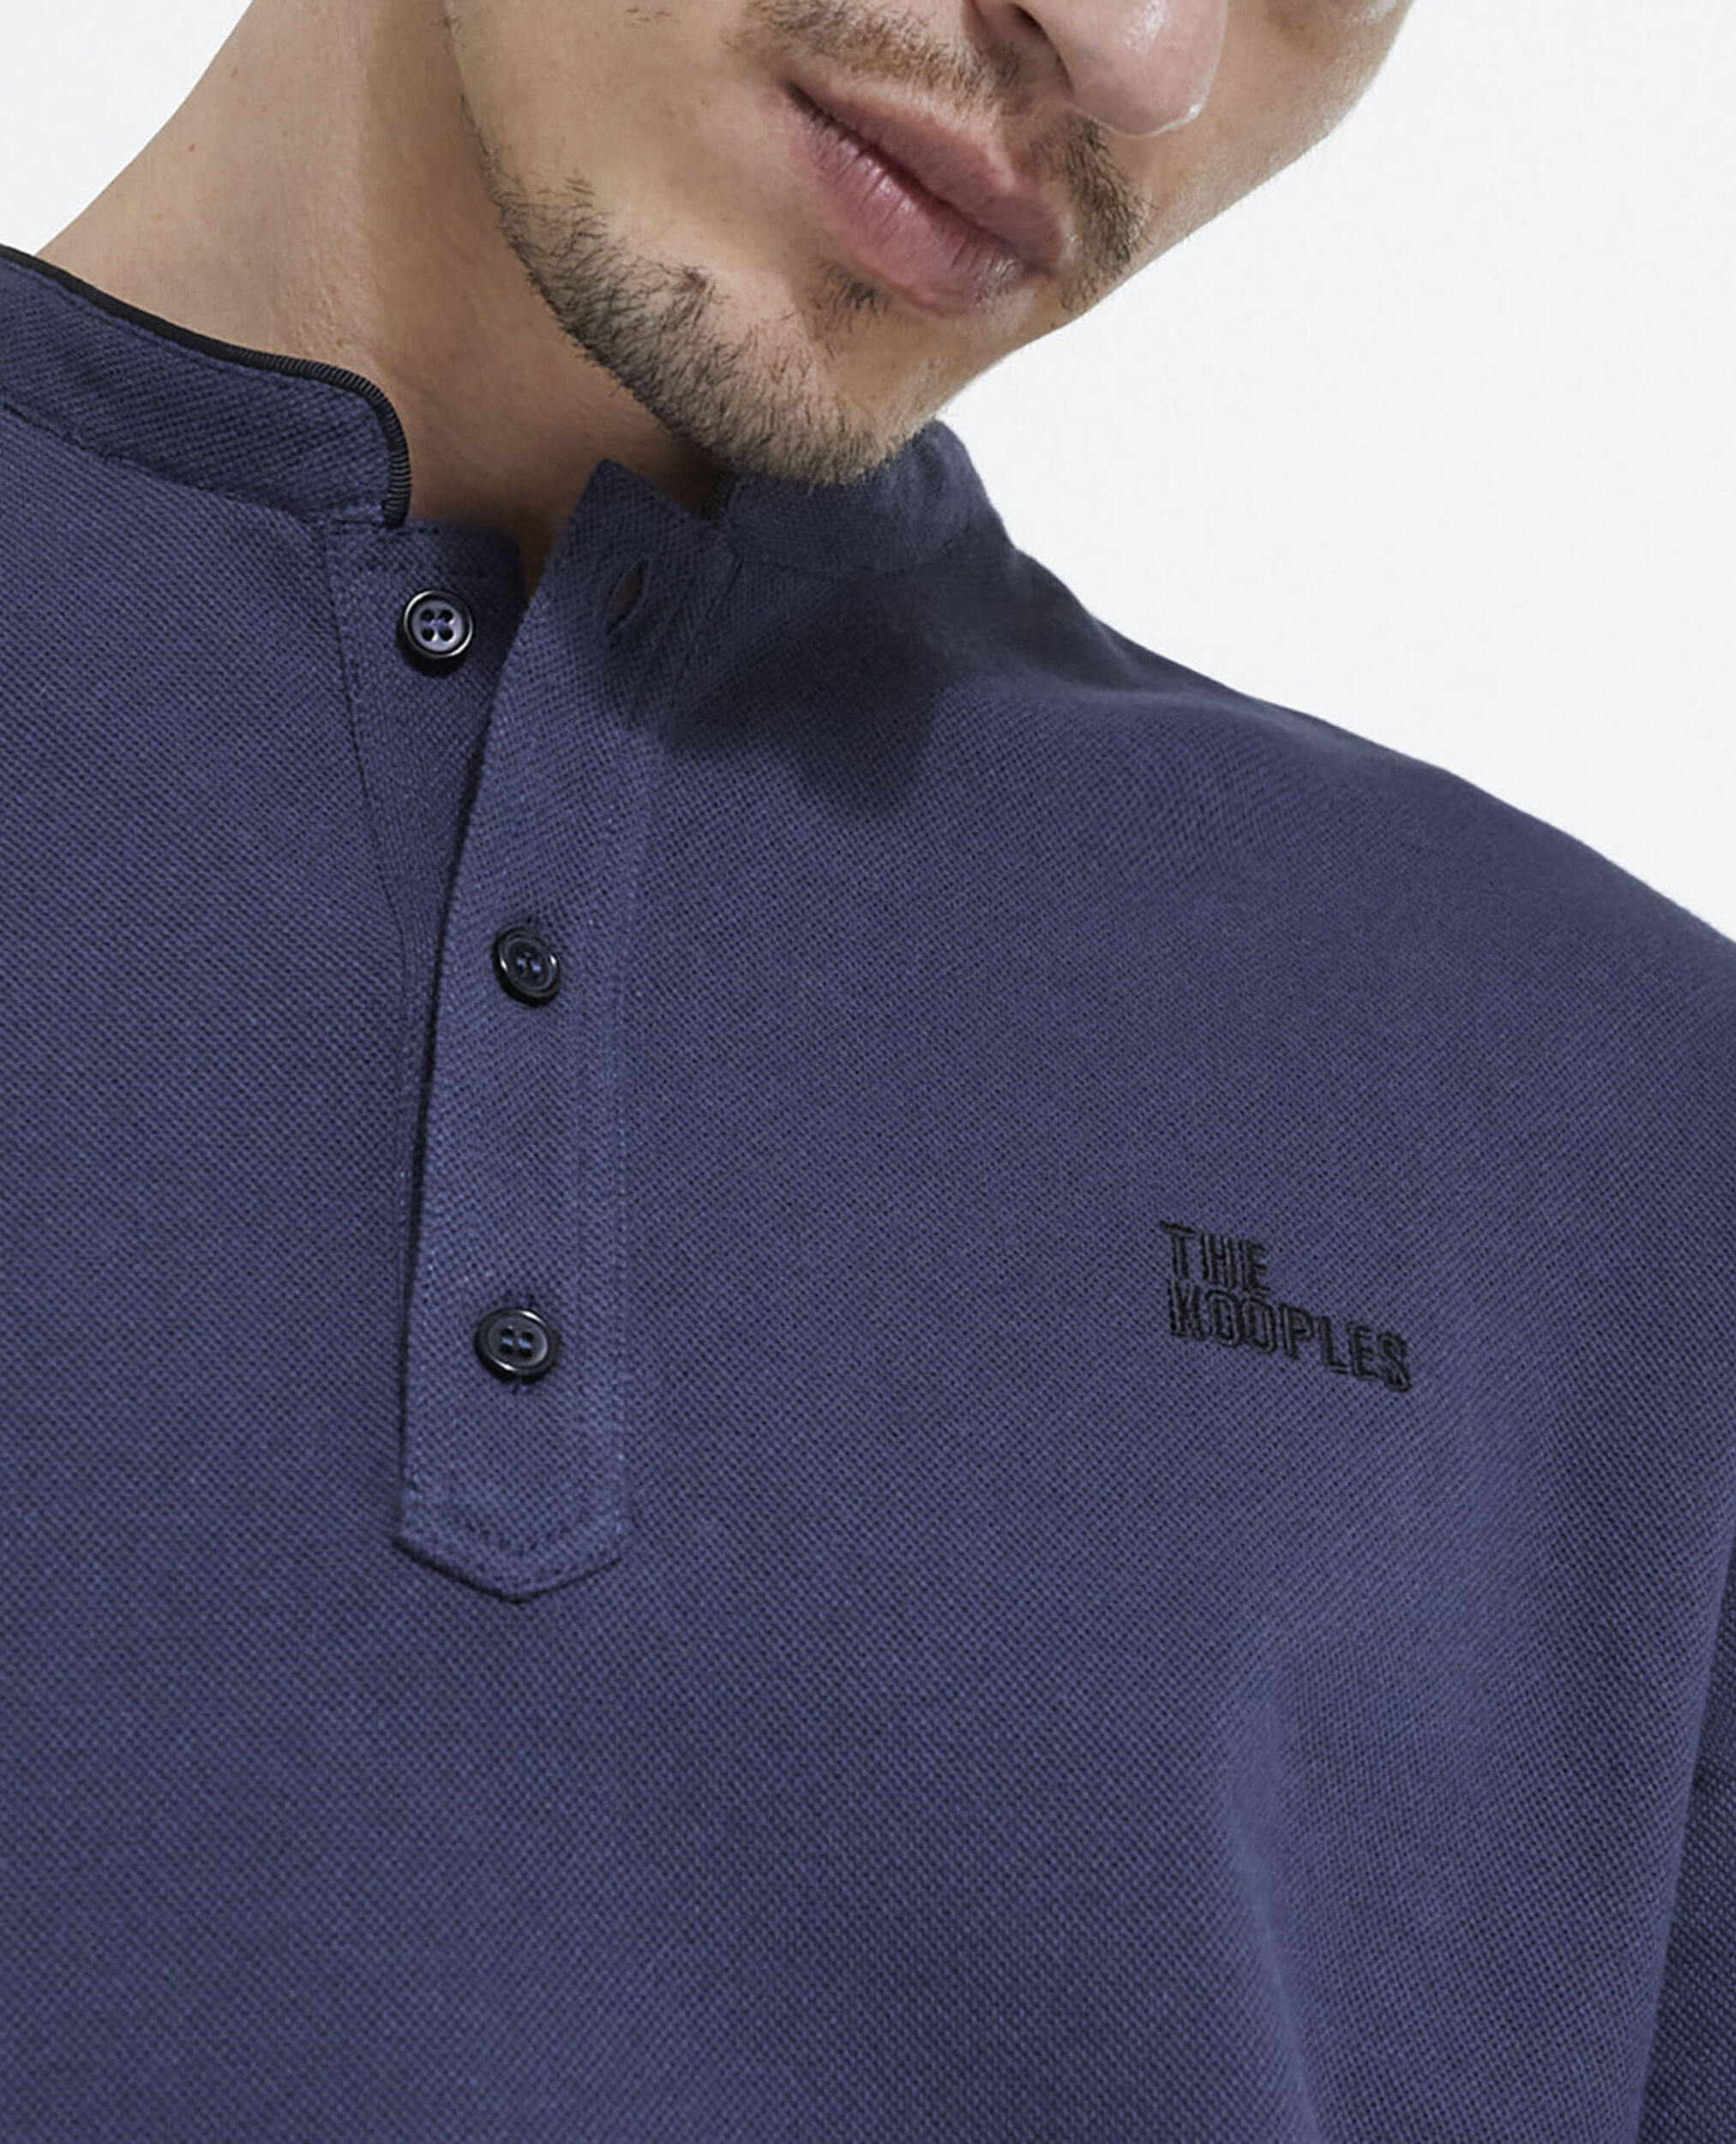 Navy blue polo, NAVY, hi-res image number null